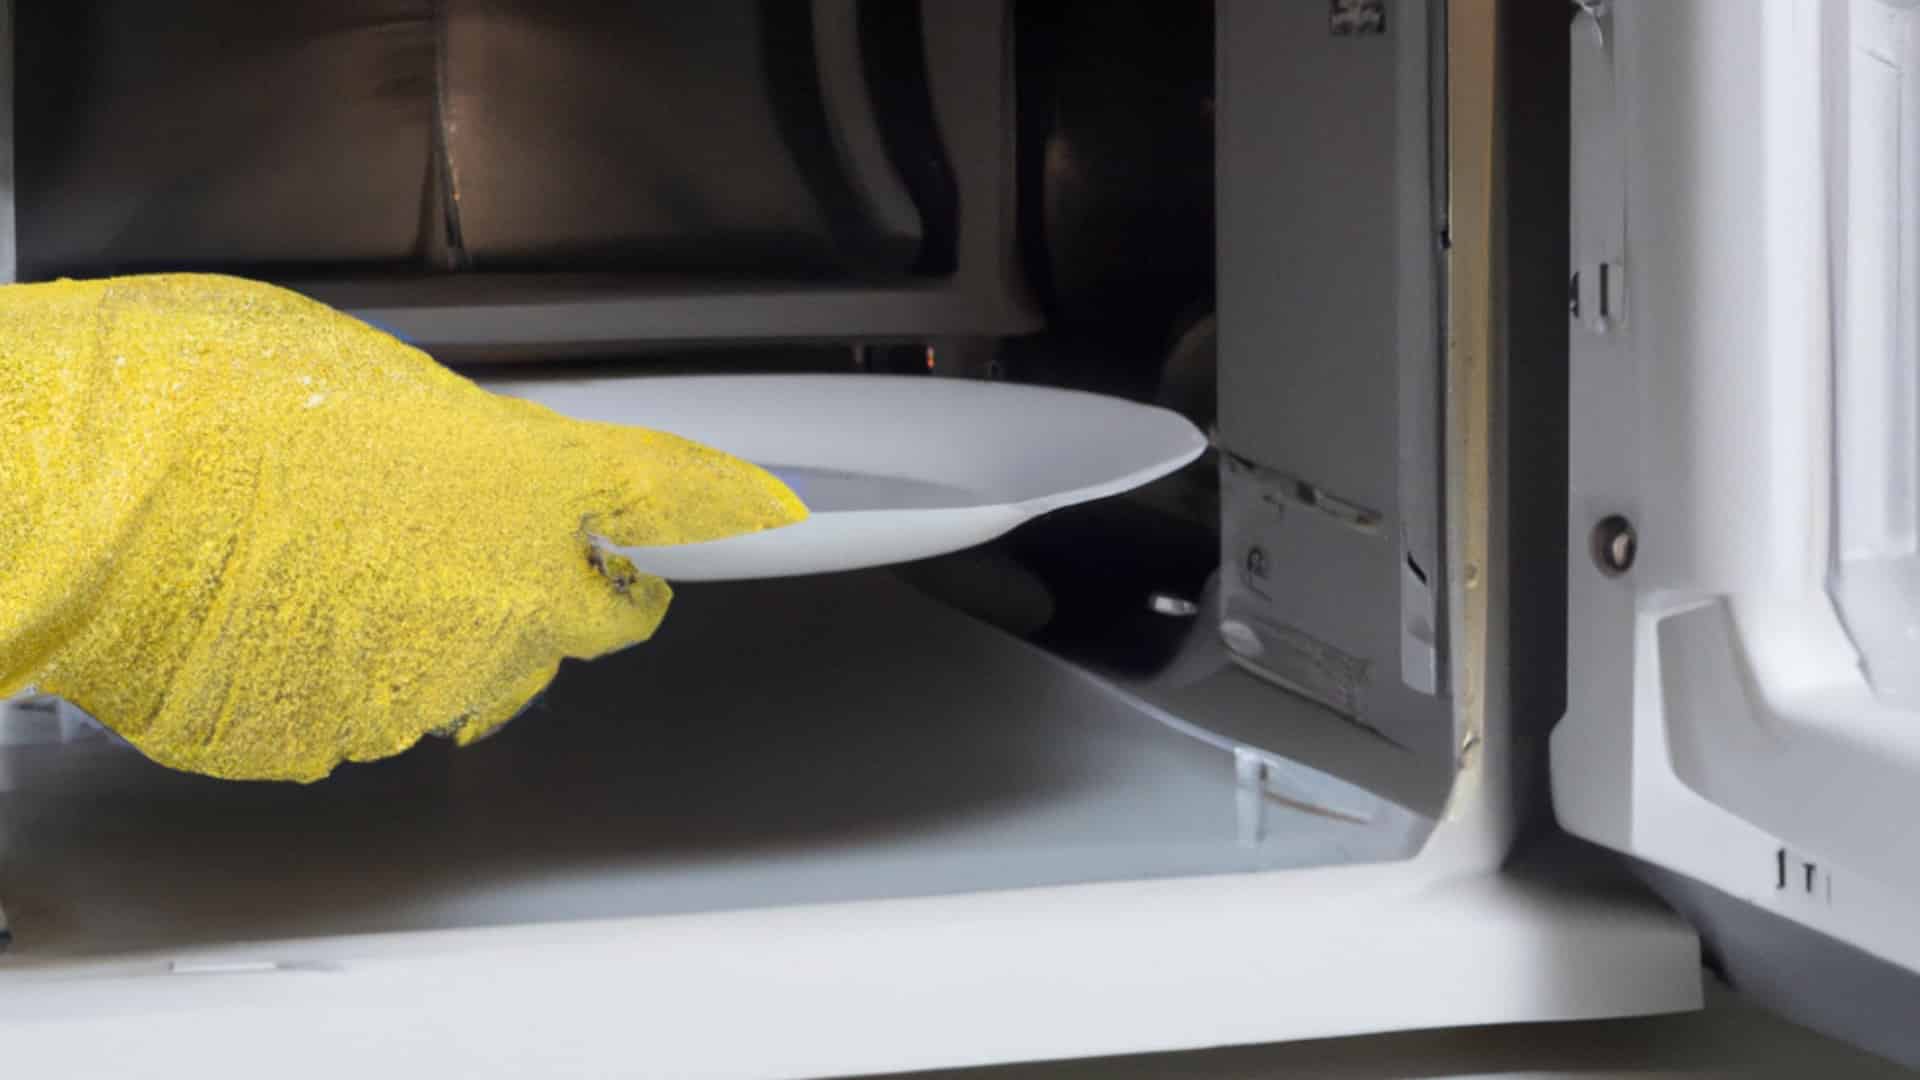 Featured image for “How to Clean a Samsung Microwave”